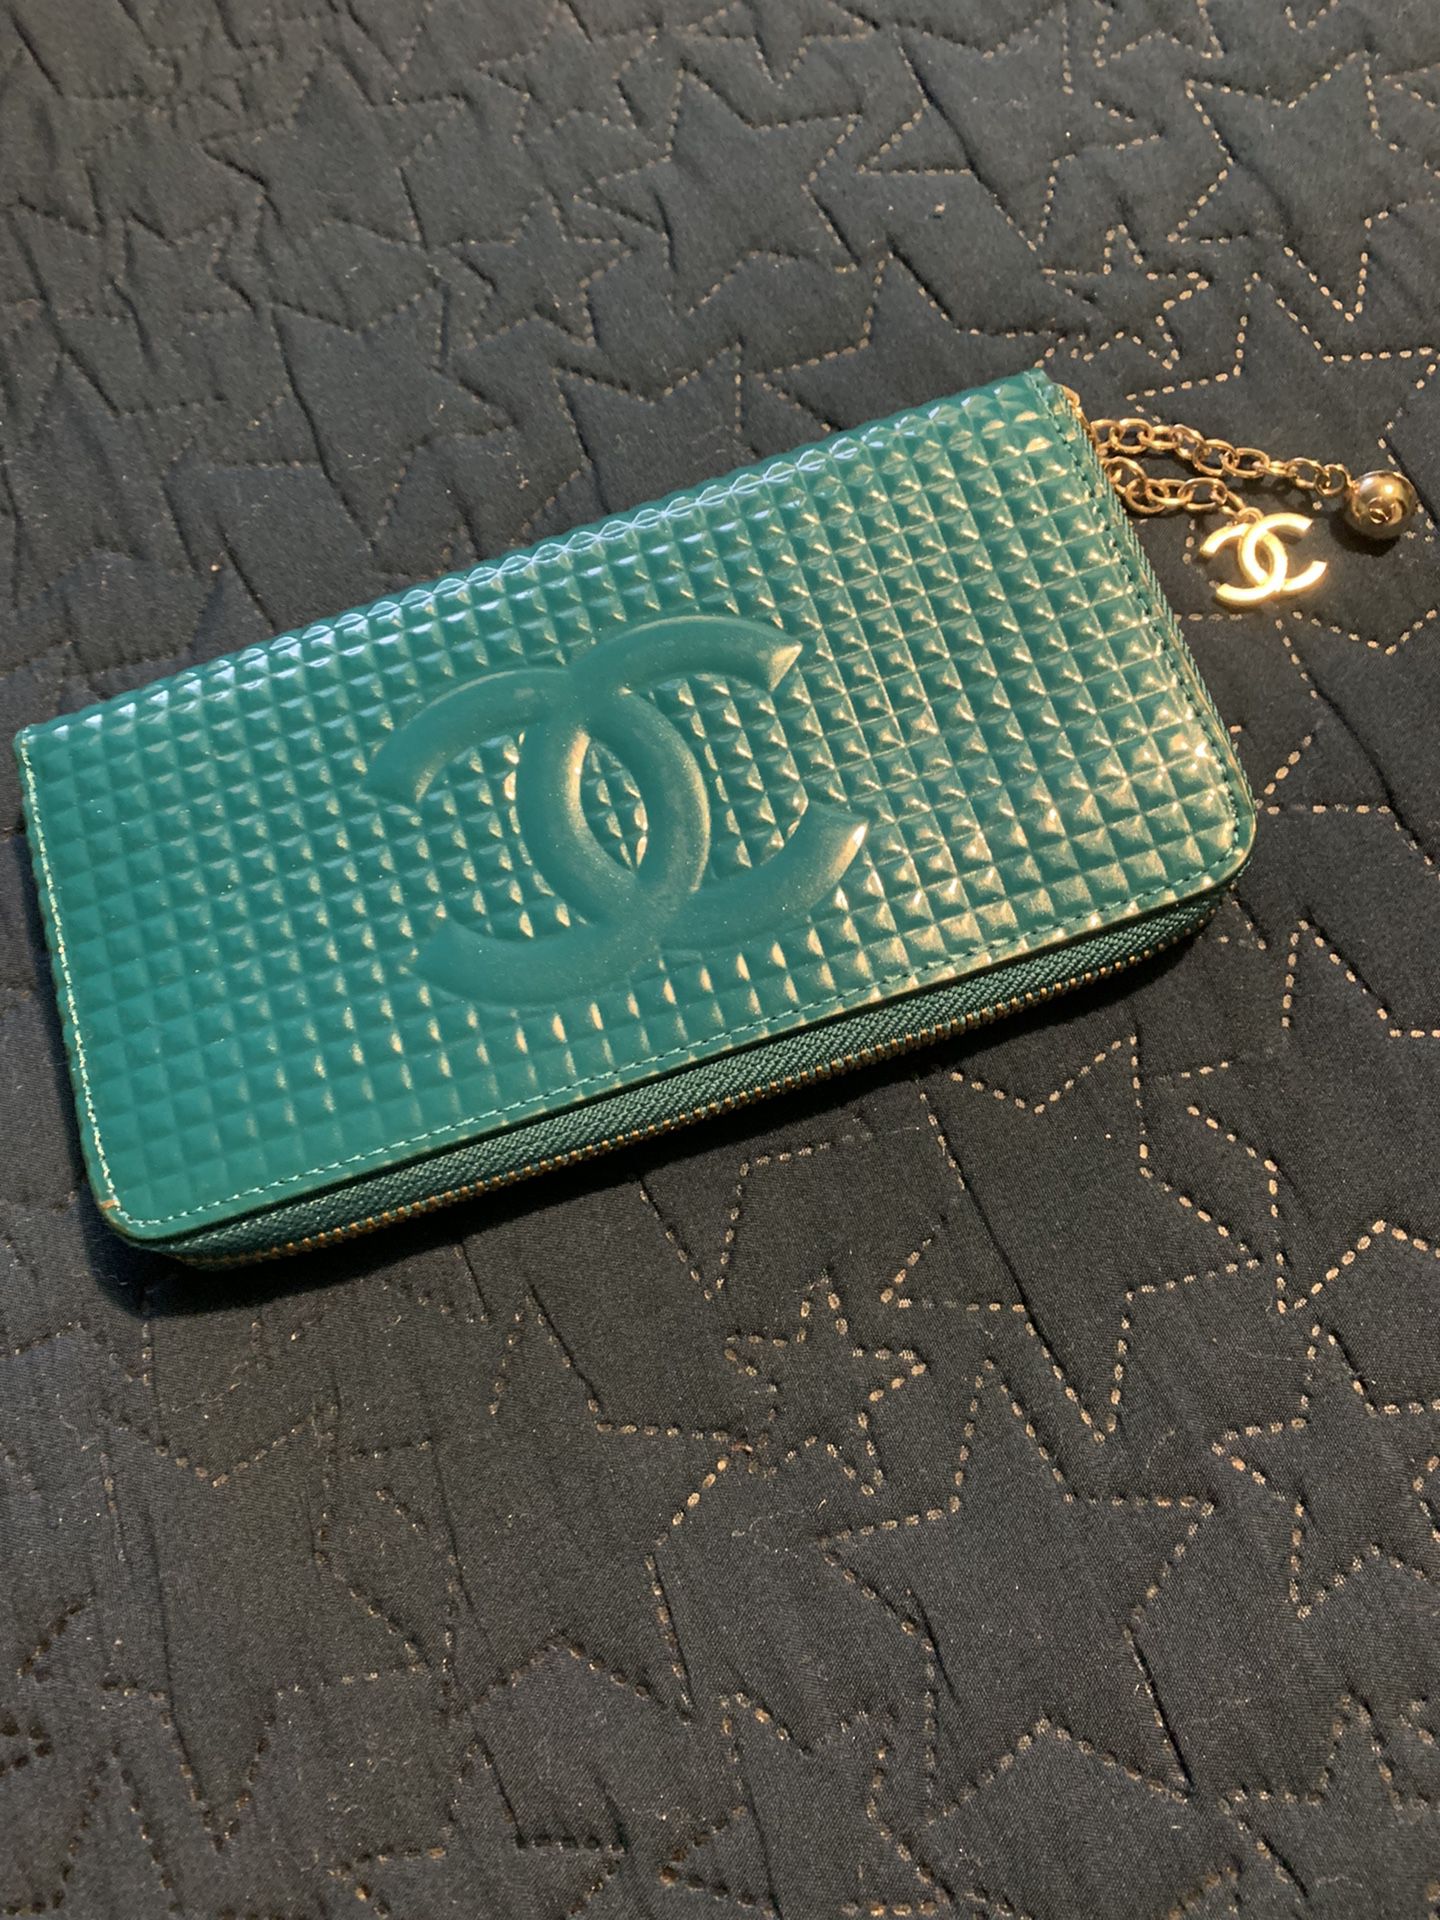 Chanel Wallet for Sale in Los Angeles, CA - OfferUp